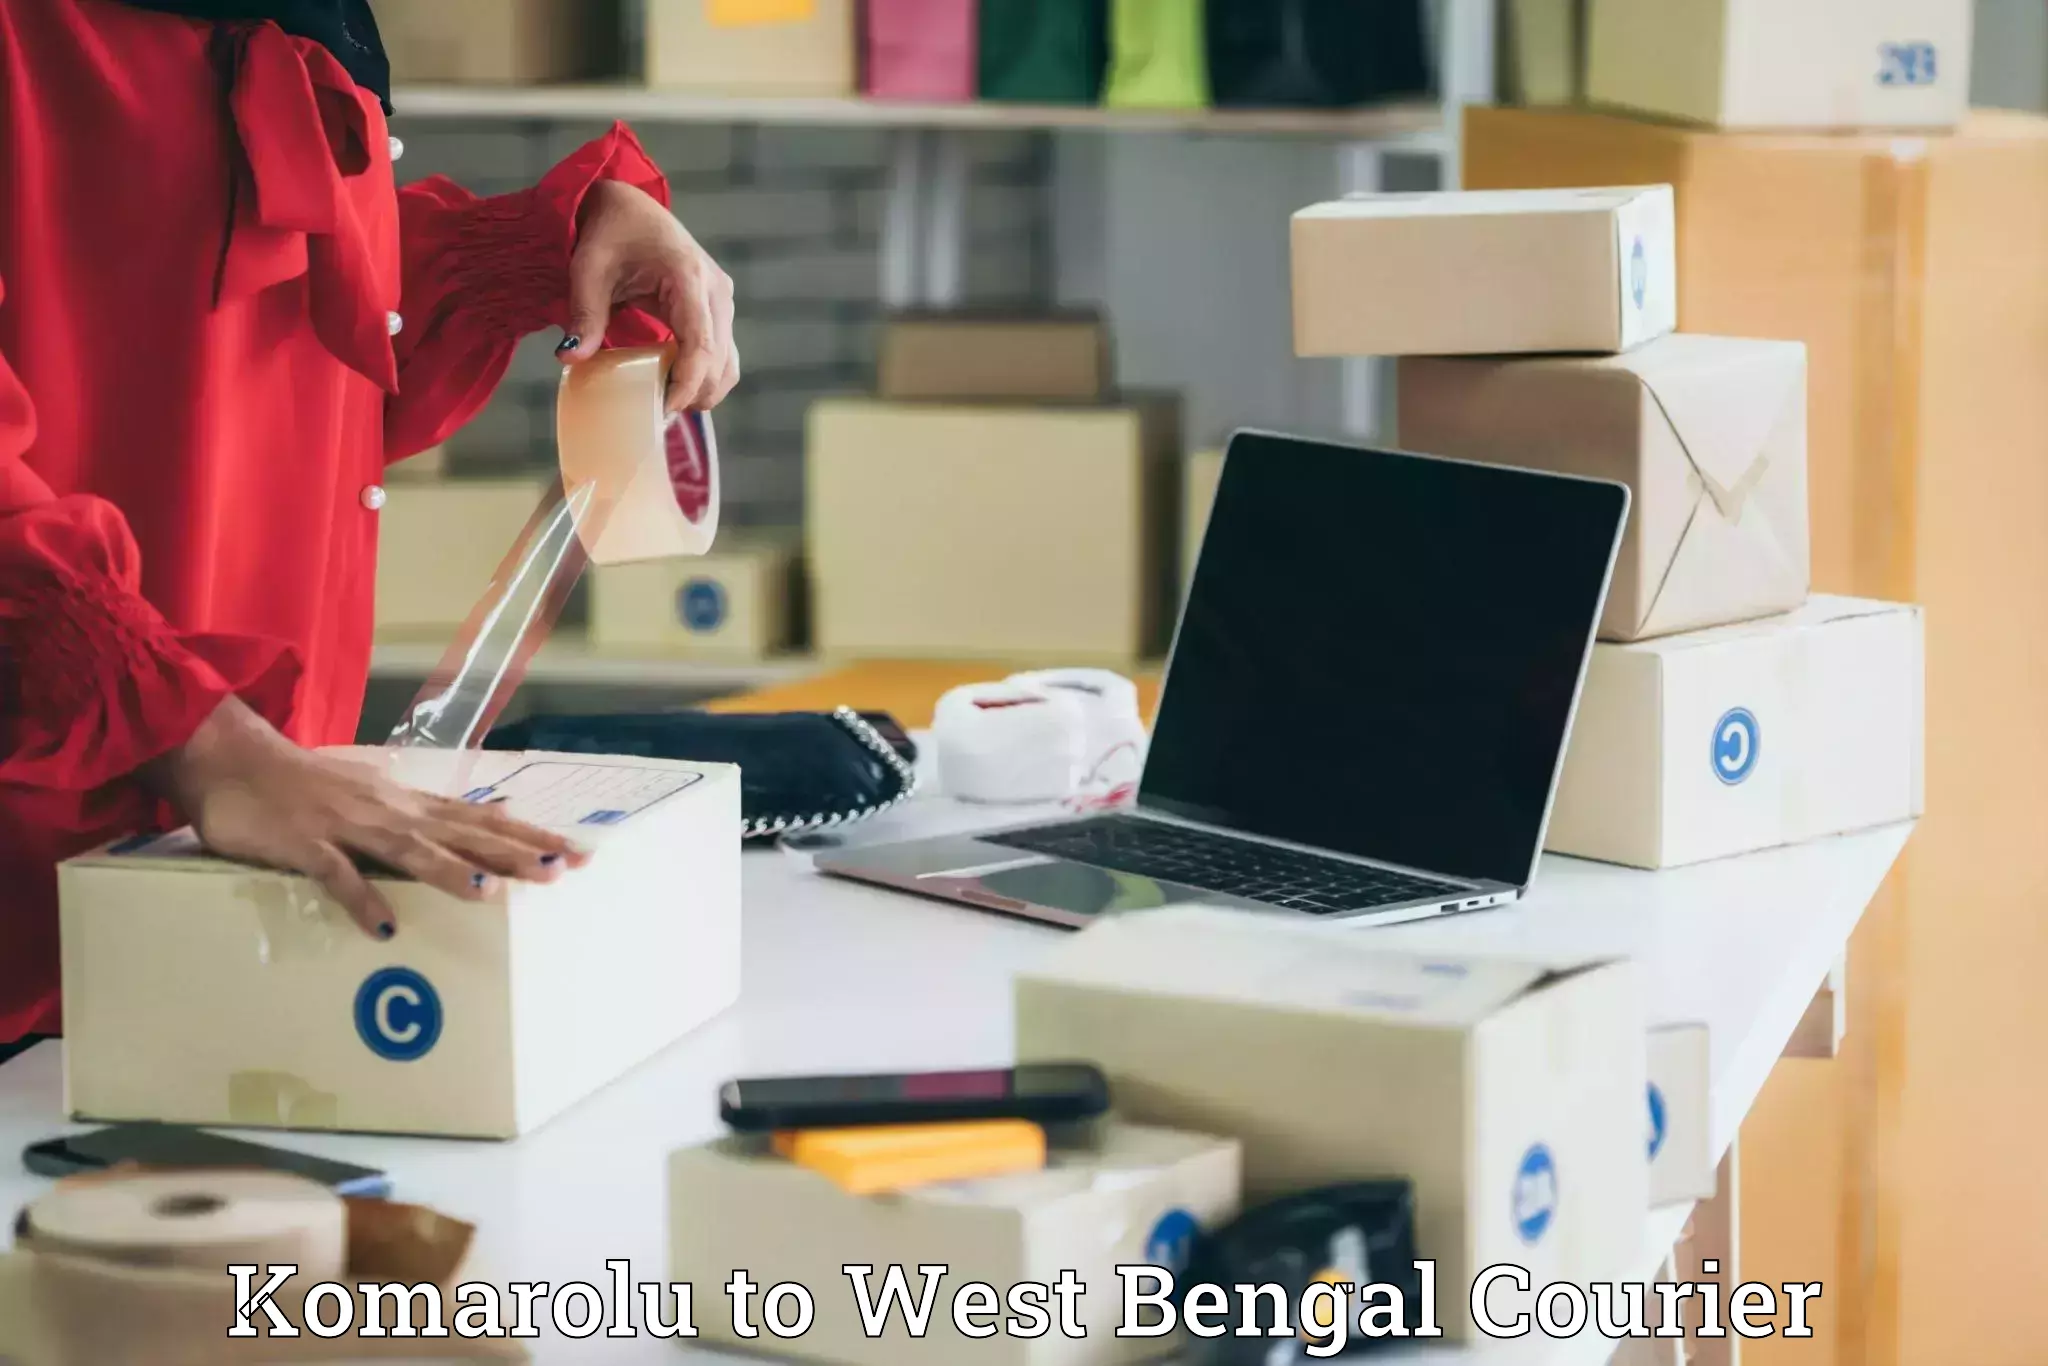 Express delivery capabilities Komarolu to West Bengal